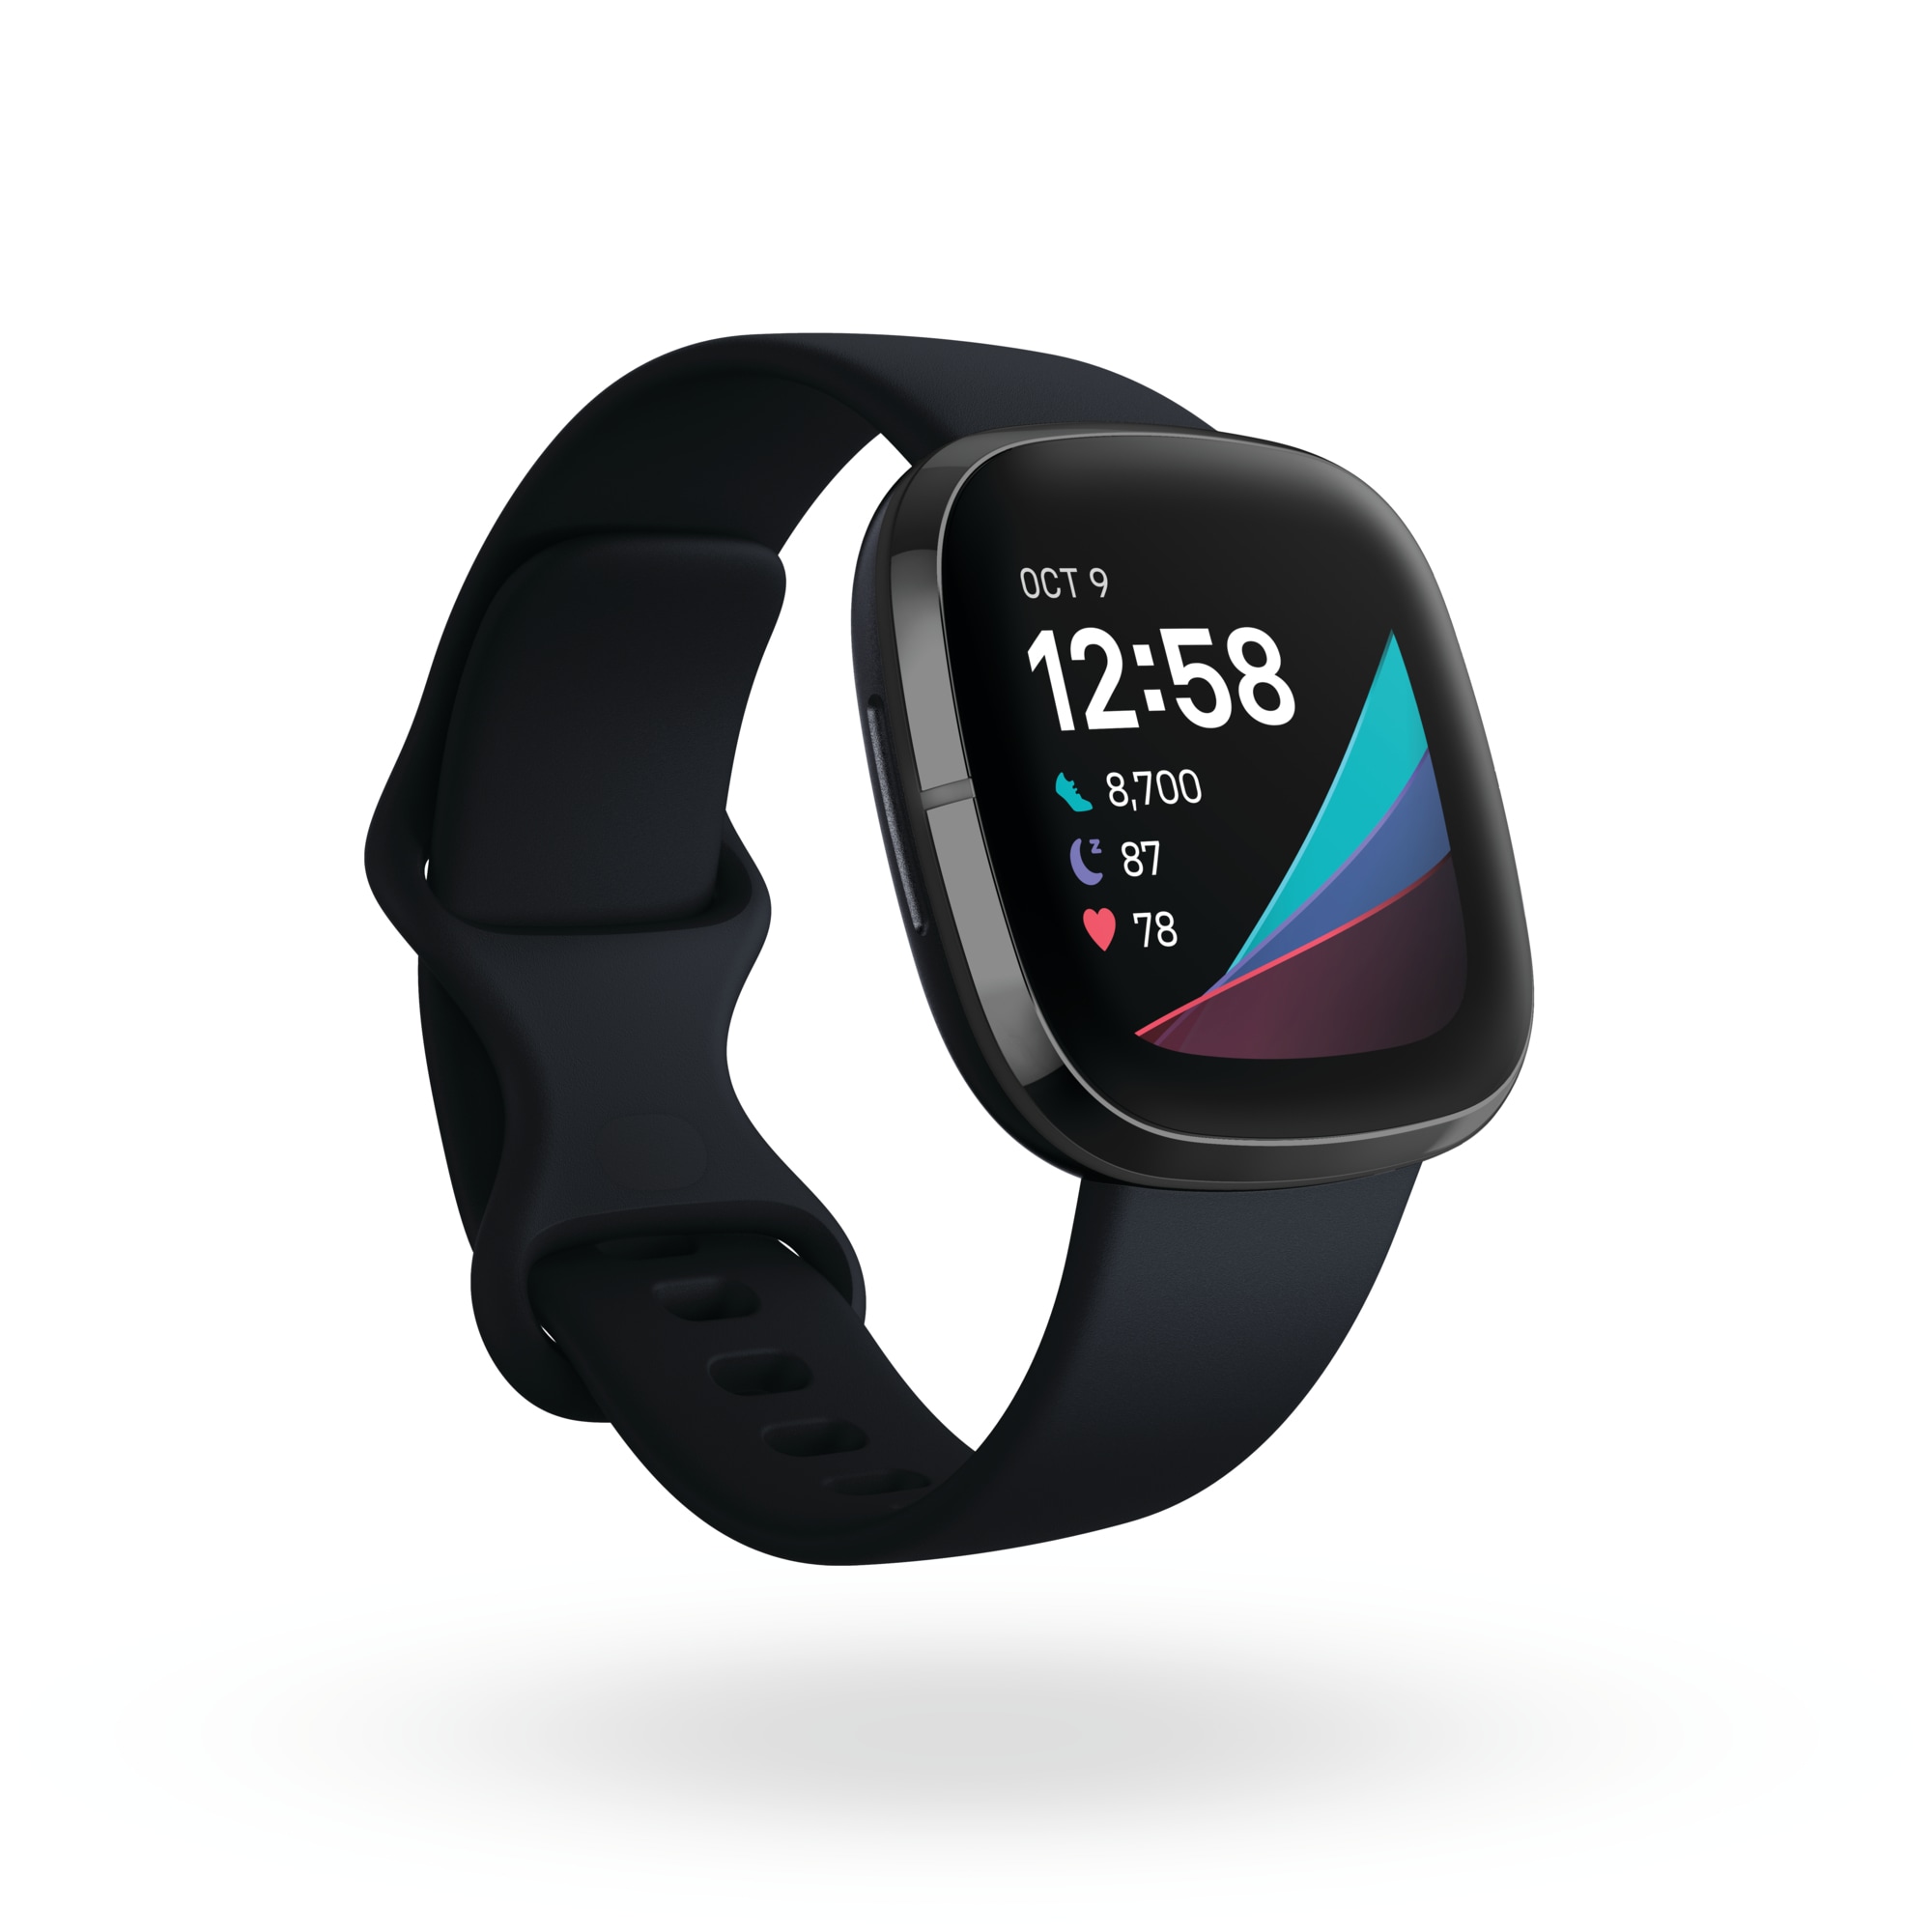 new fitbit launch 2020